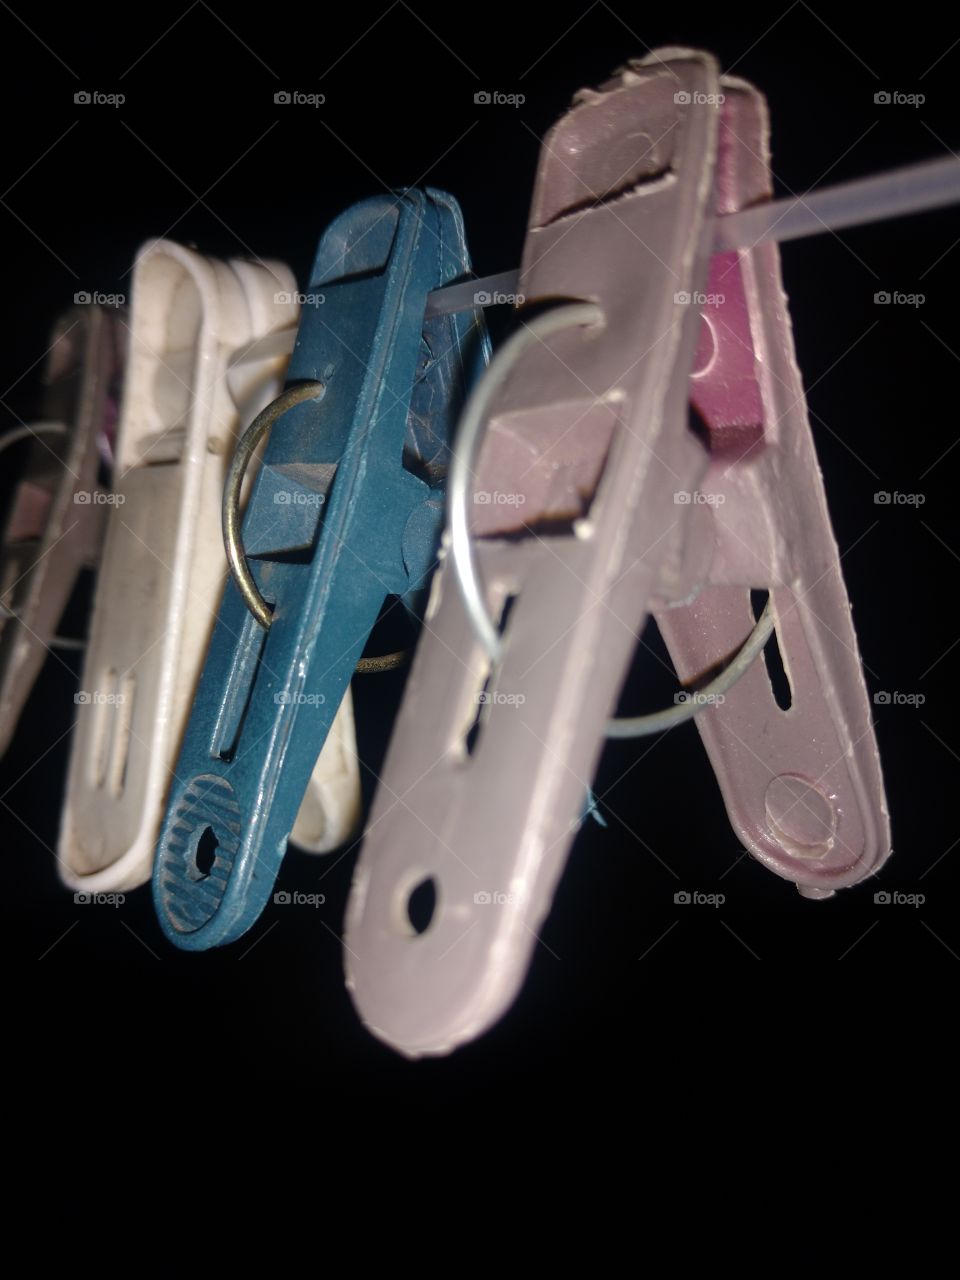 laundry drying clips